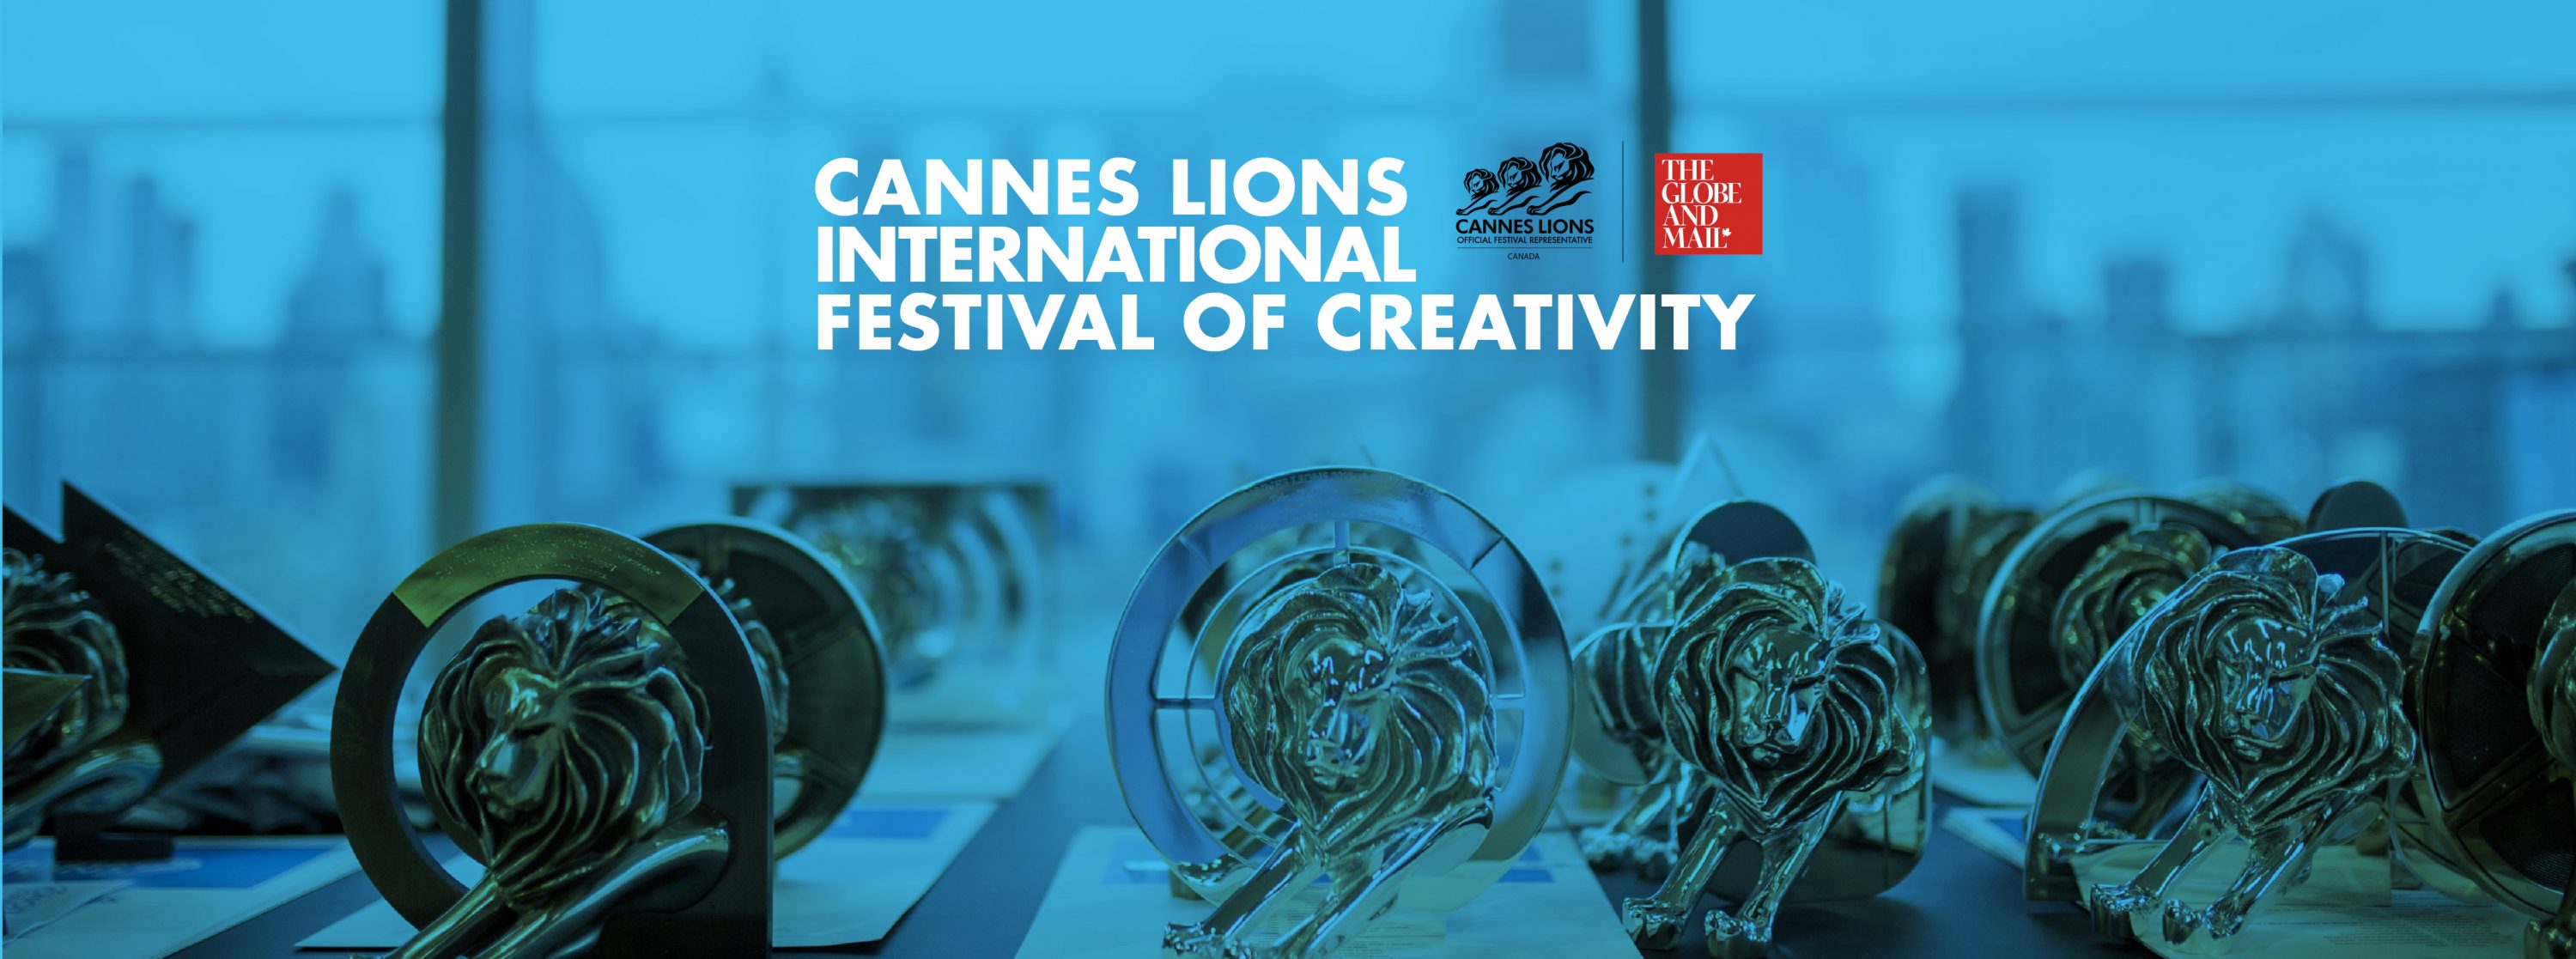 Cannes lions | Get Involved